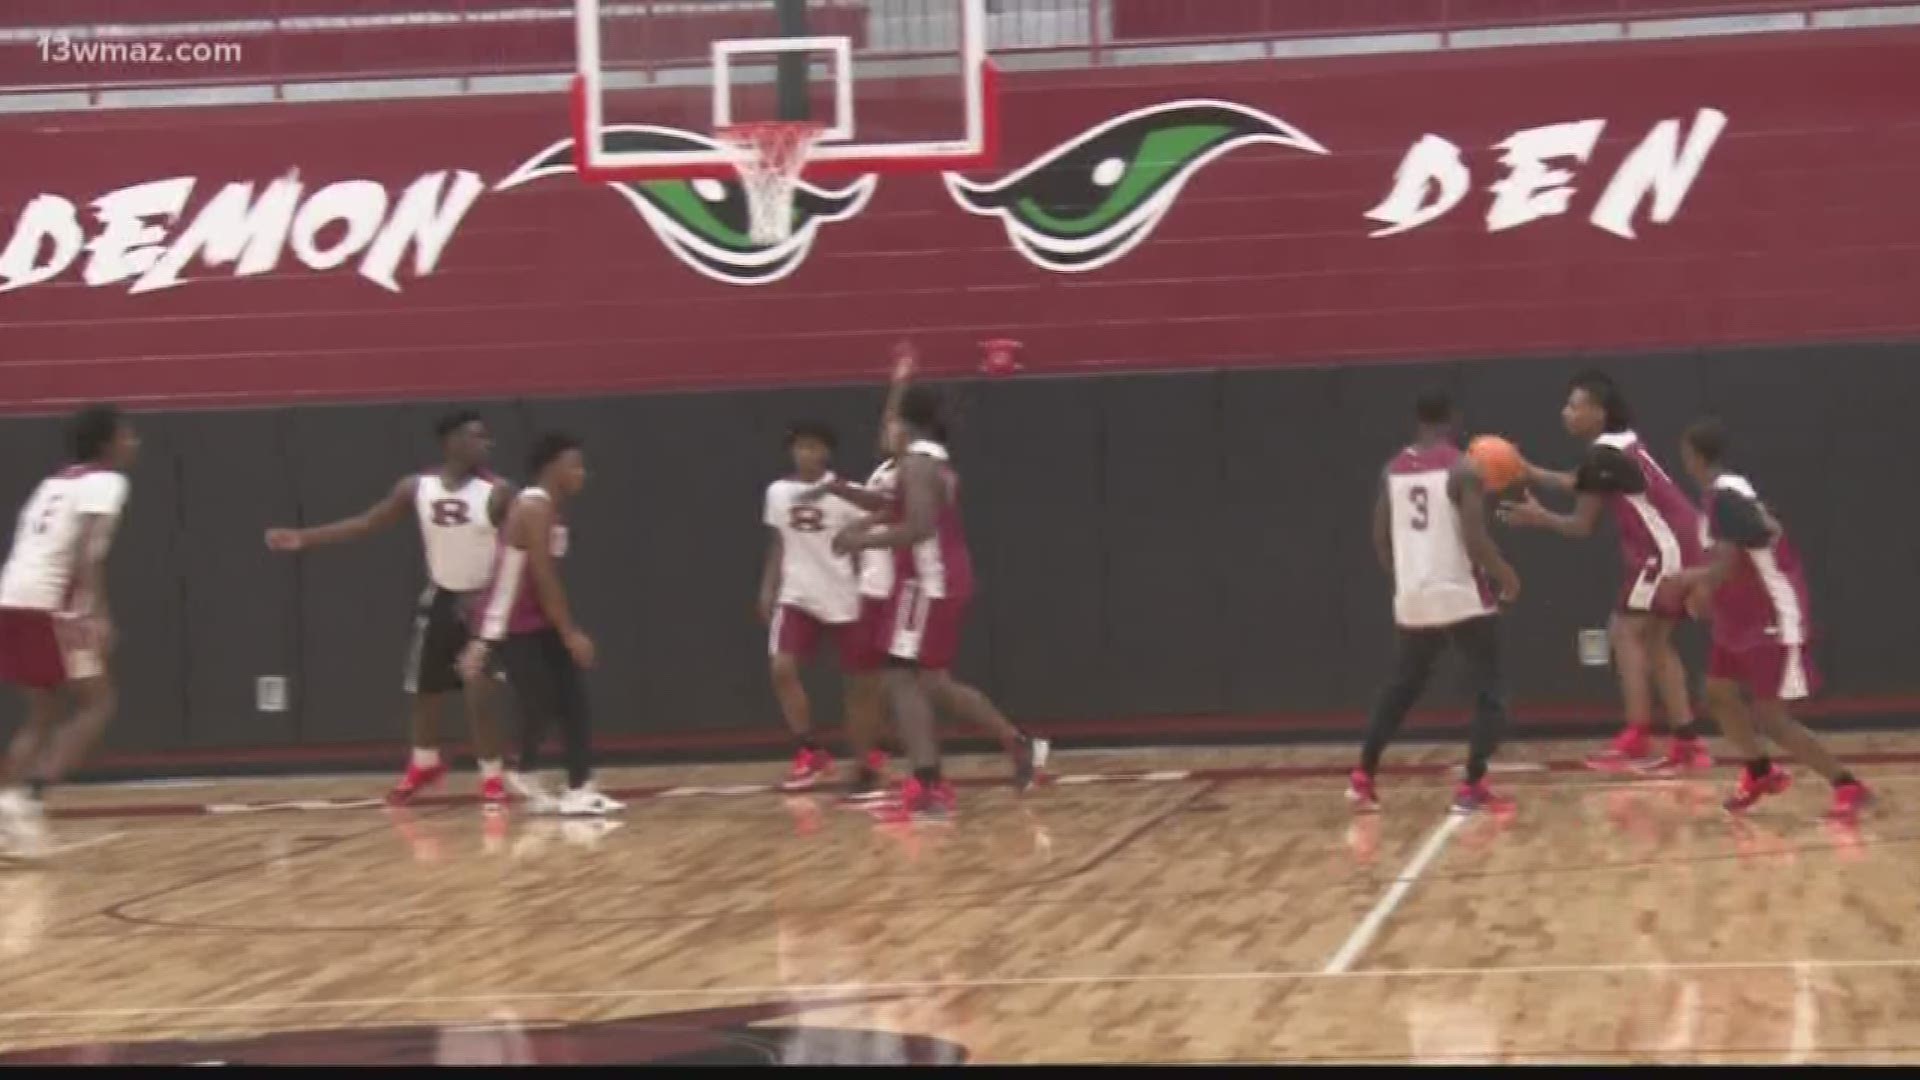 One of Central Georgia's top programs is not only entering a new season, but doing it in a new gym.